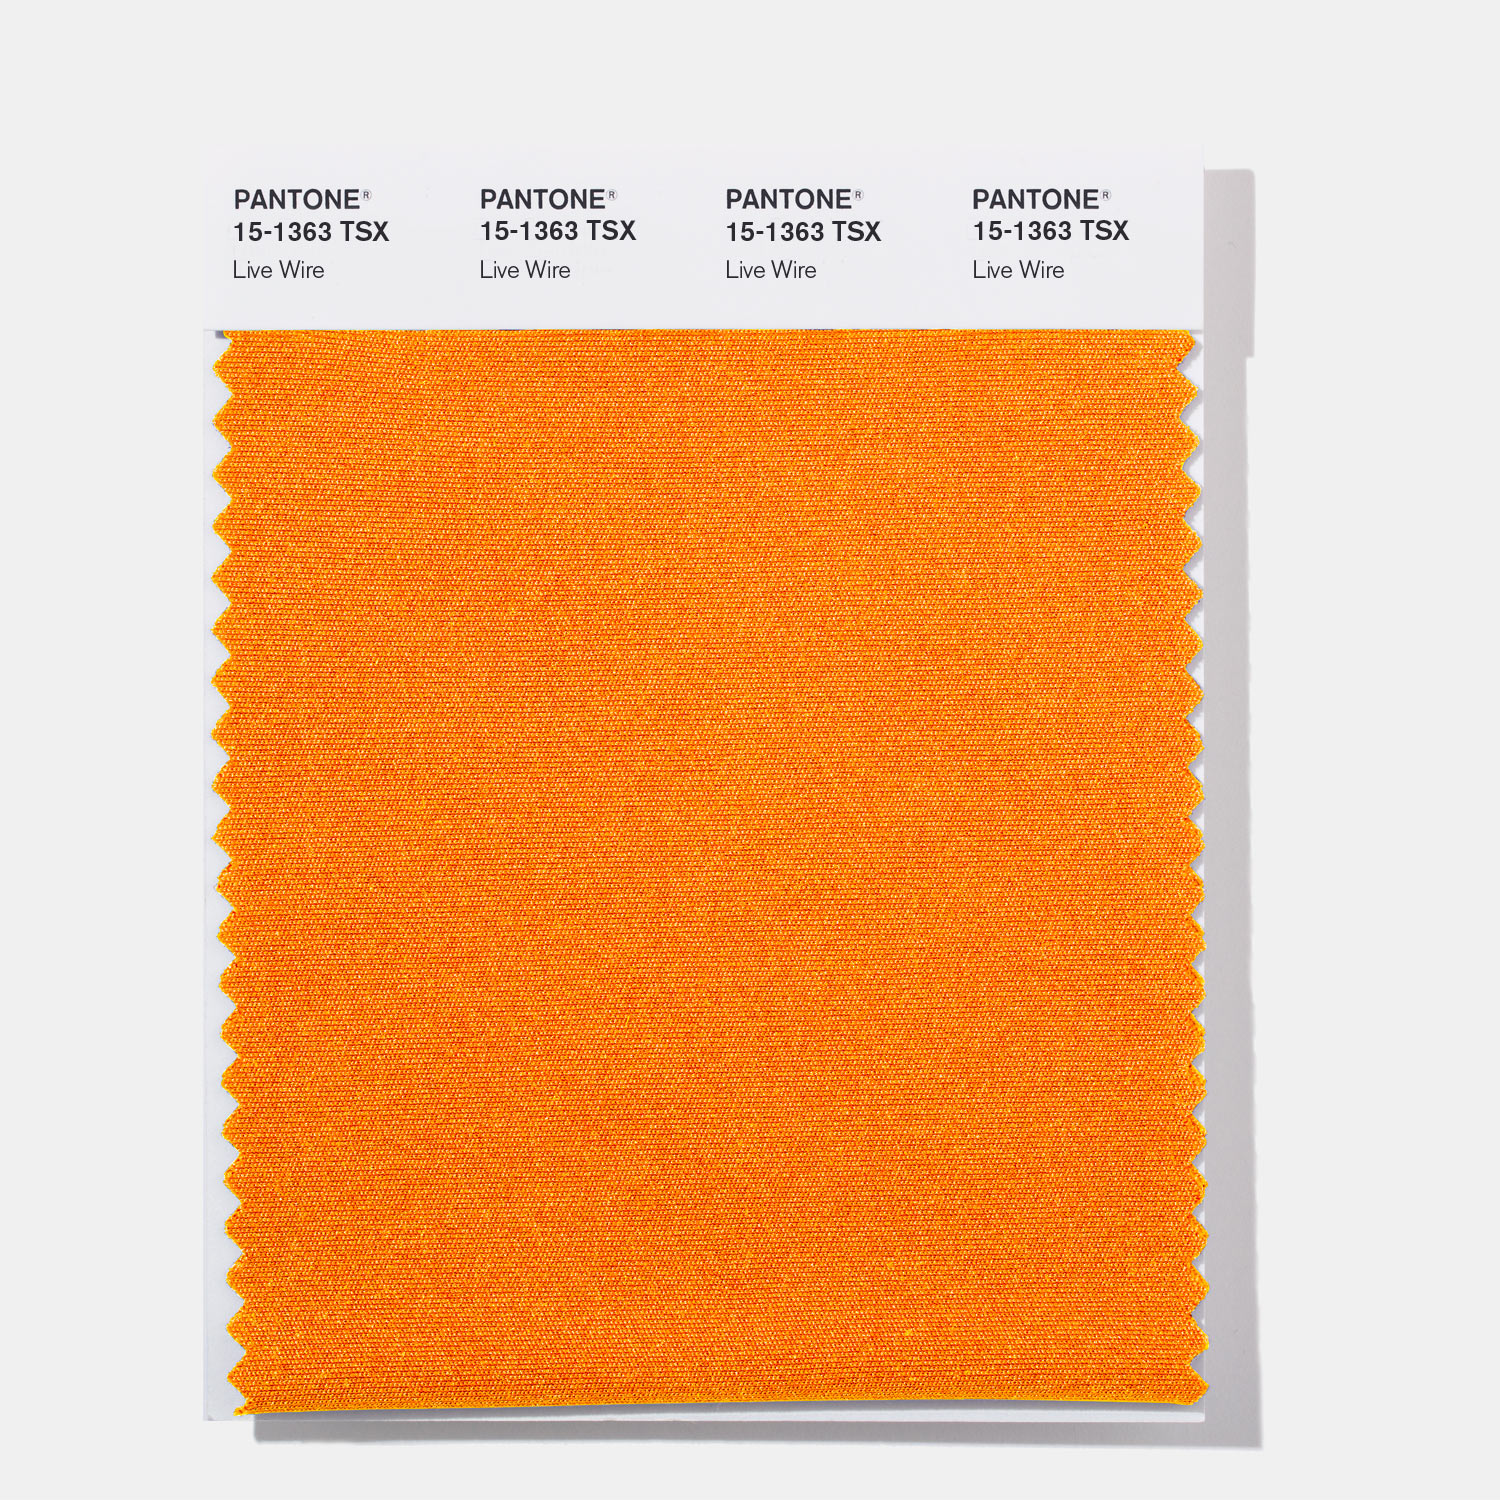 Pantone Polyester Swatch 15-1363 Live Wire